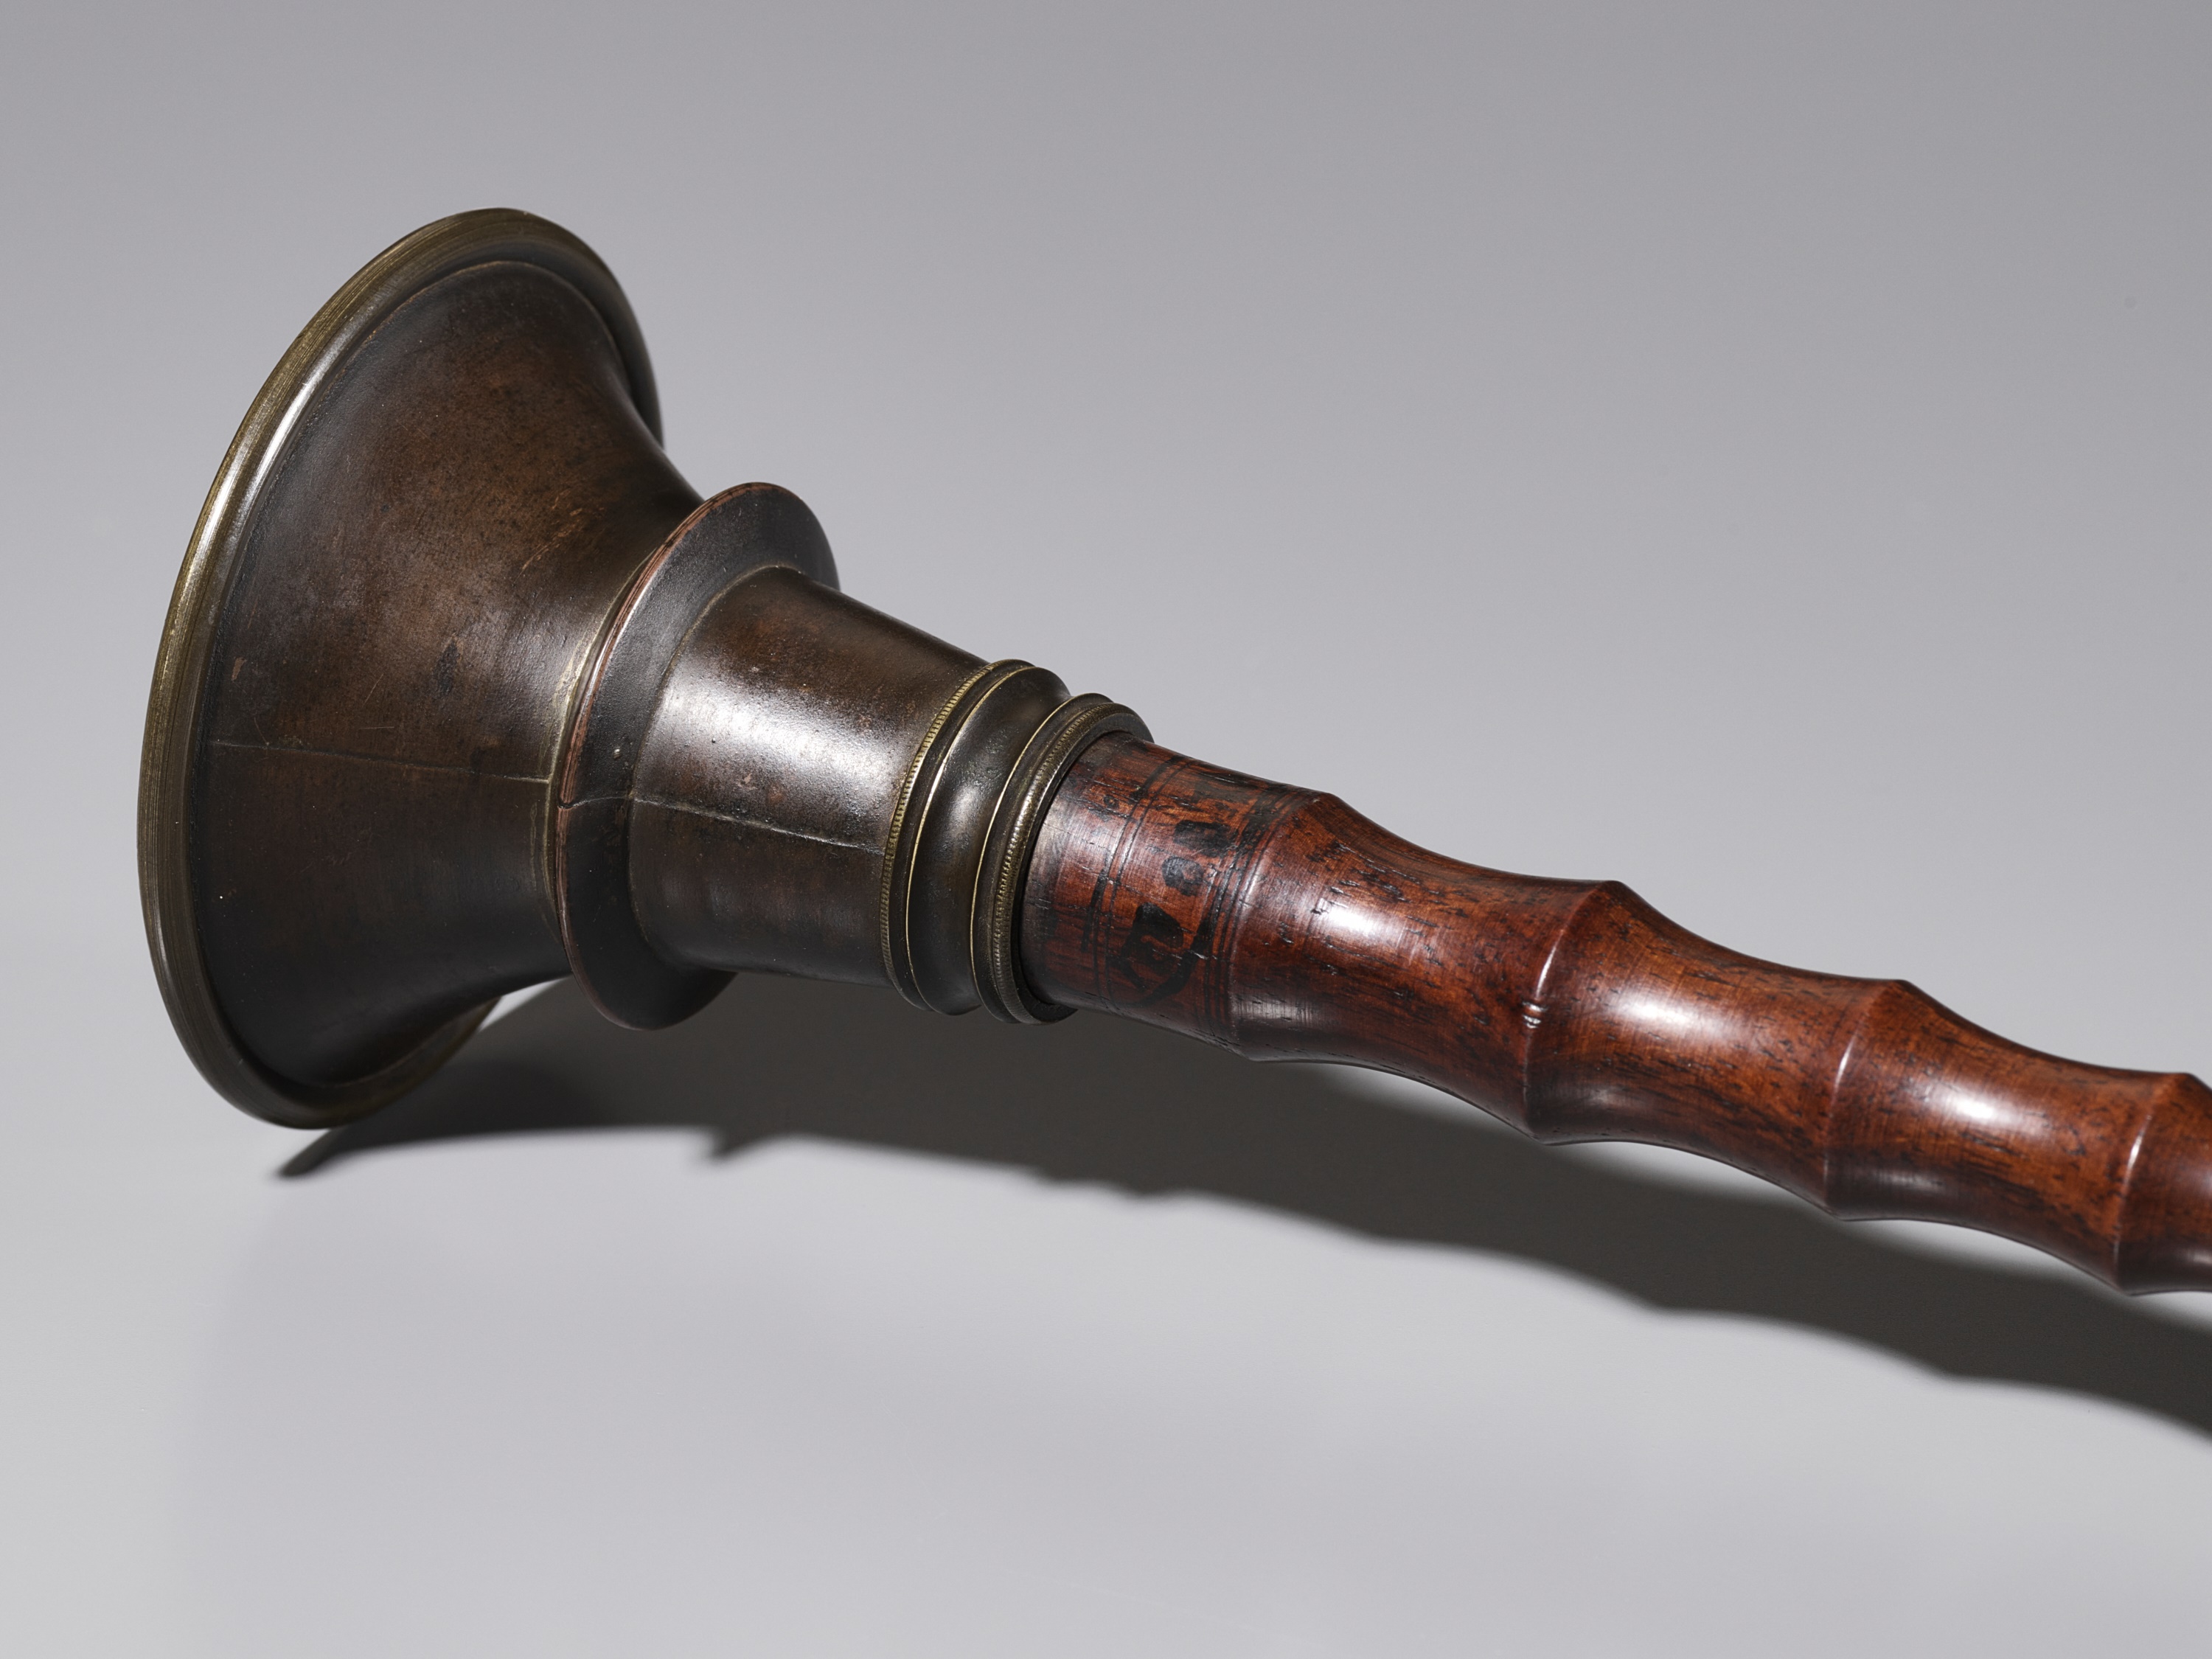 A BRASS AND WOOD OBOE, HAIDI, 18TH-19TH CENTURY - Image 9 of 9